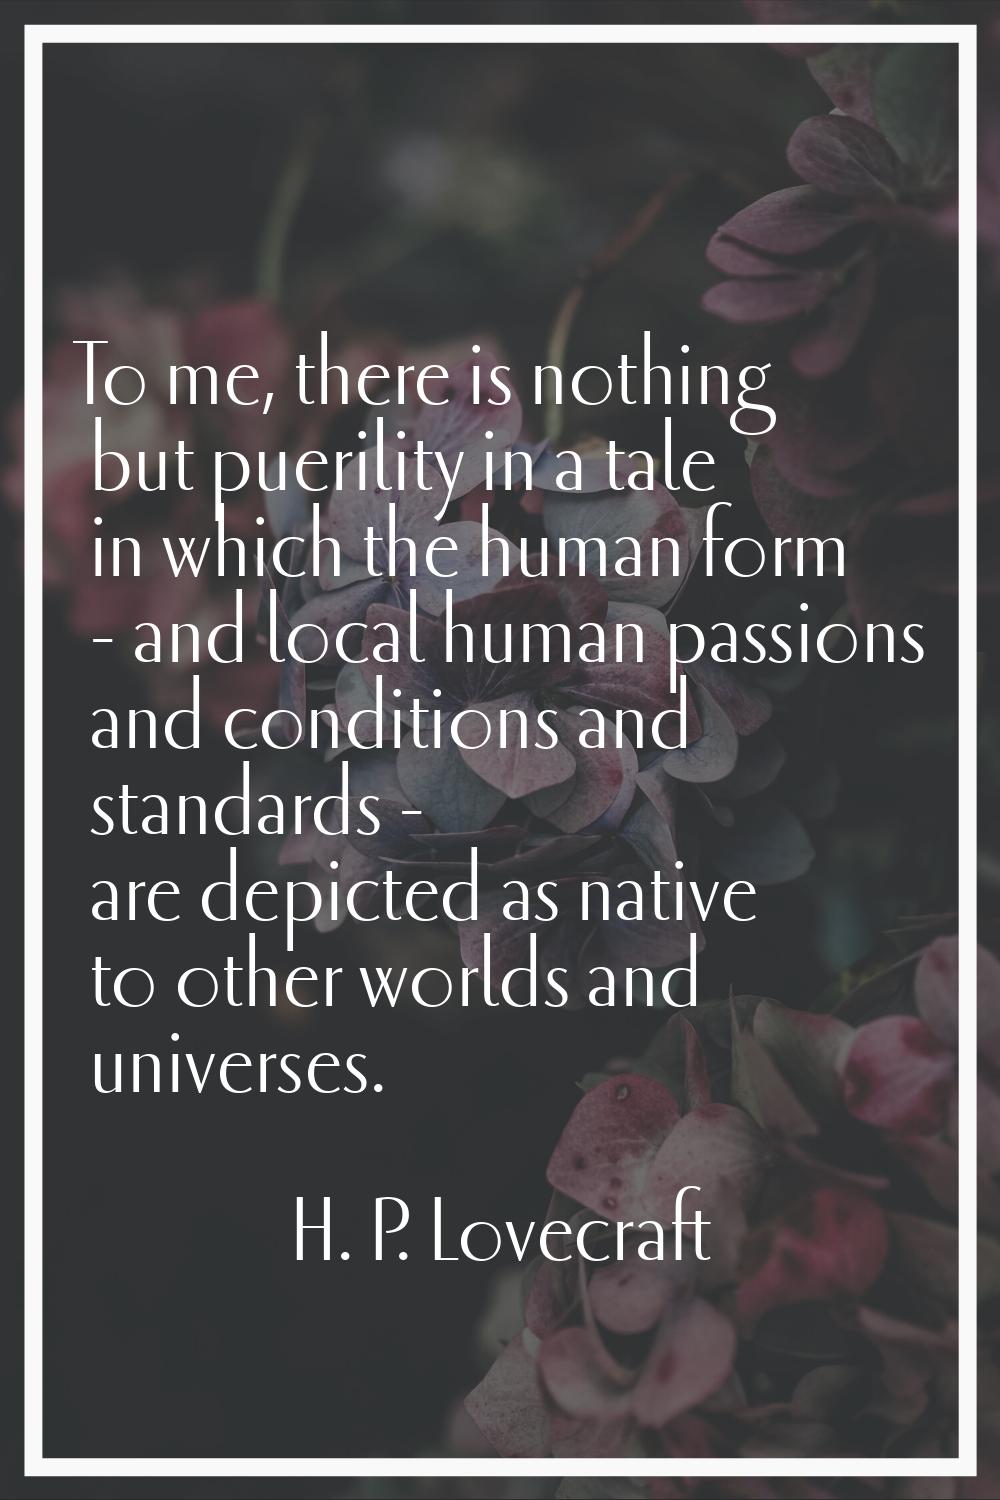 To me, there is nothing but puerility in a tale in which the human form - and local human passions 